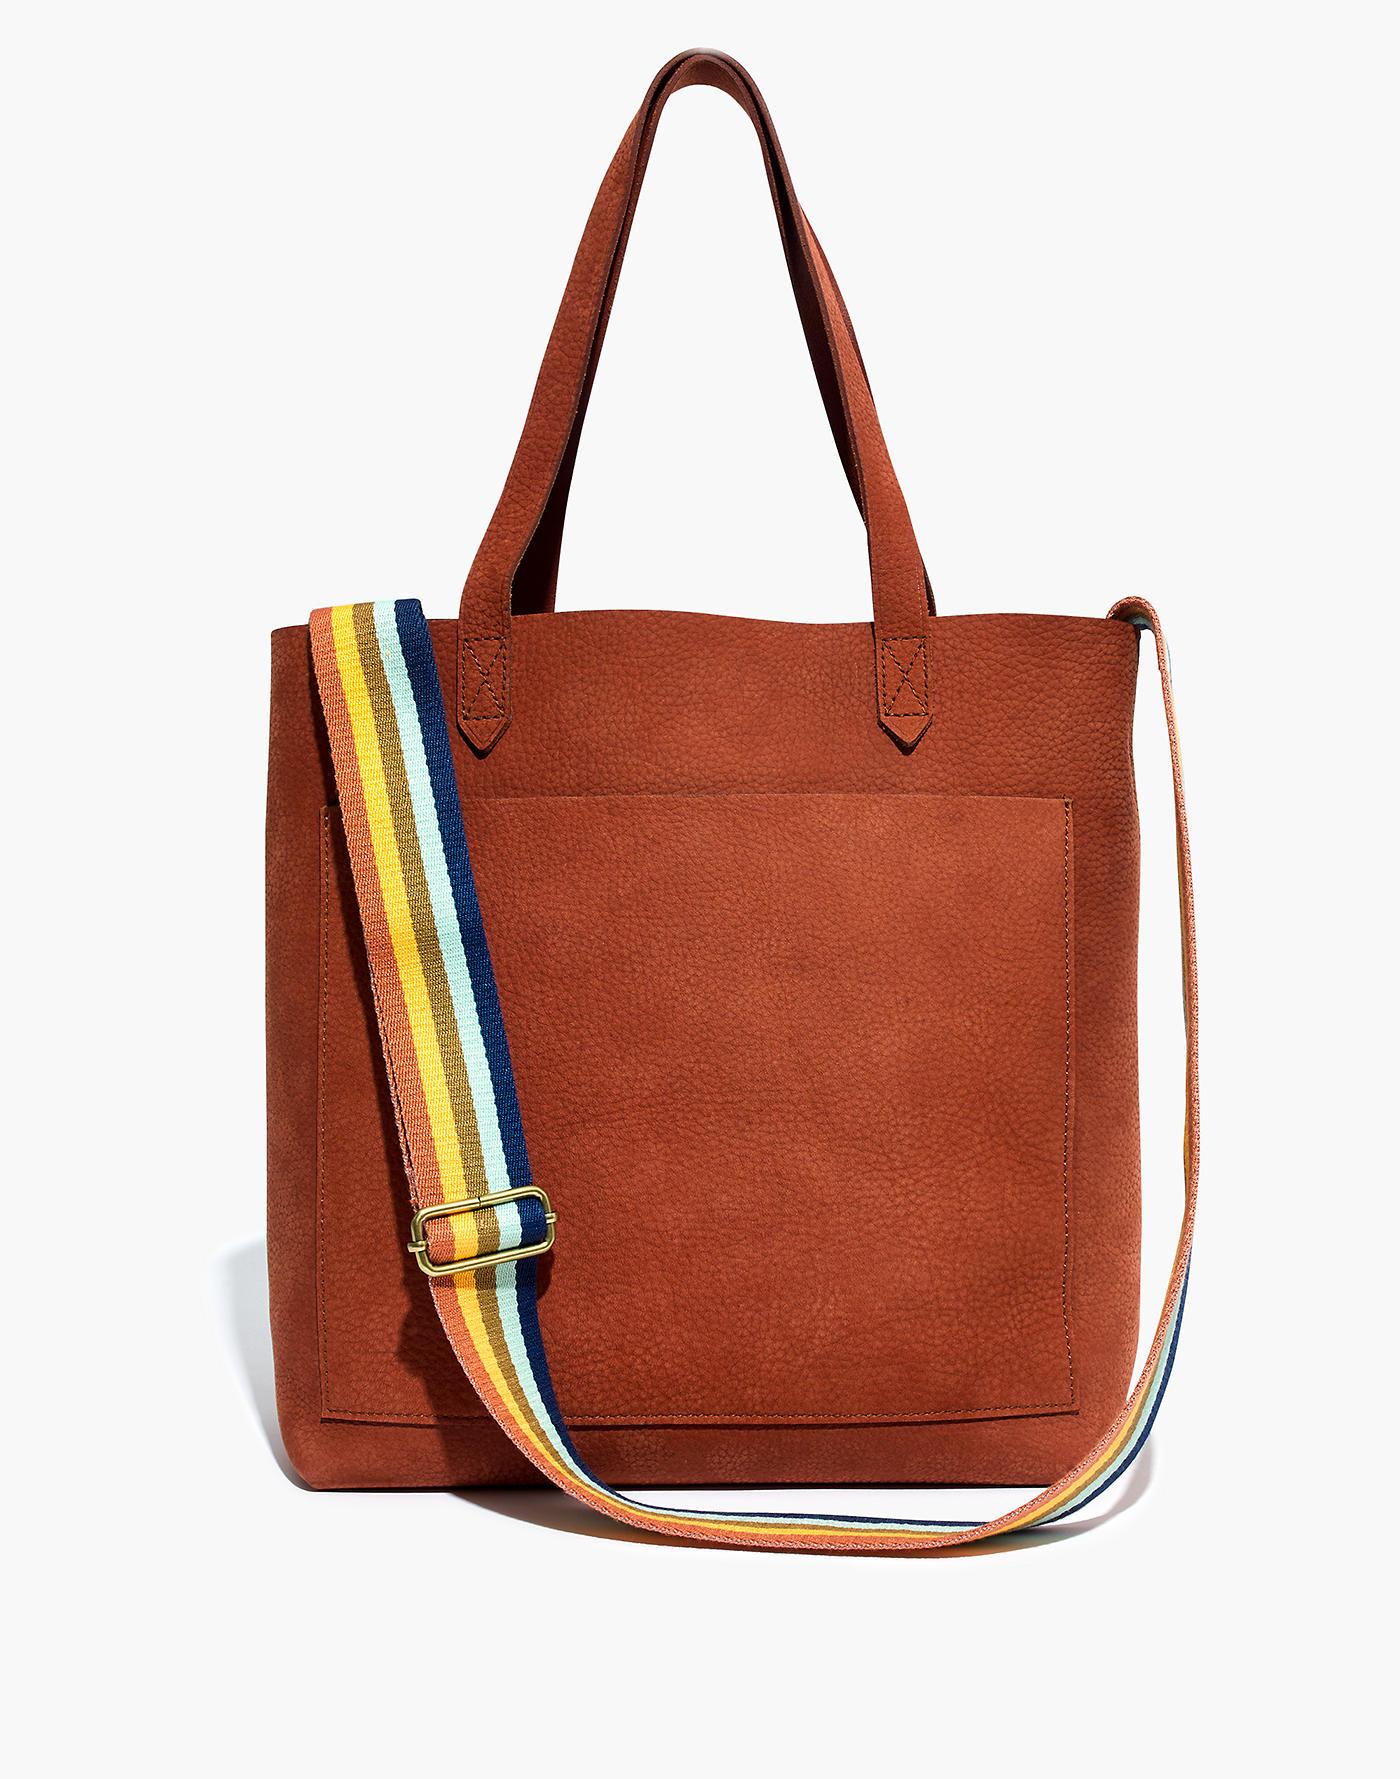 Madewell The Medium Transport Tote In Nubuck Leather: Striped 